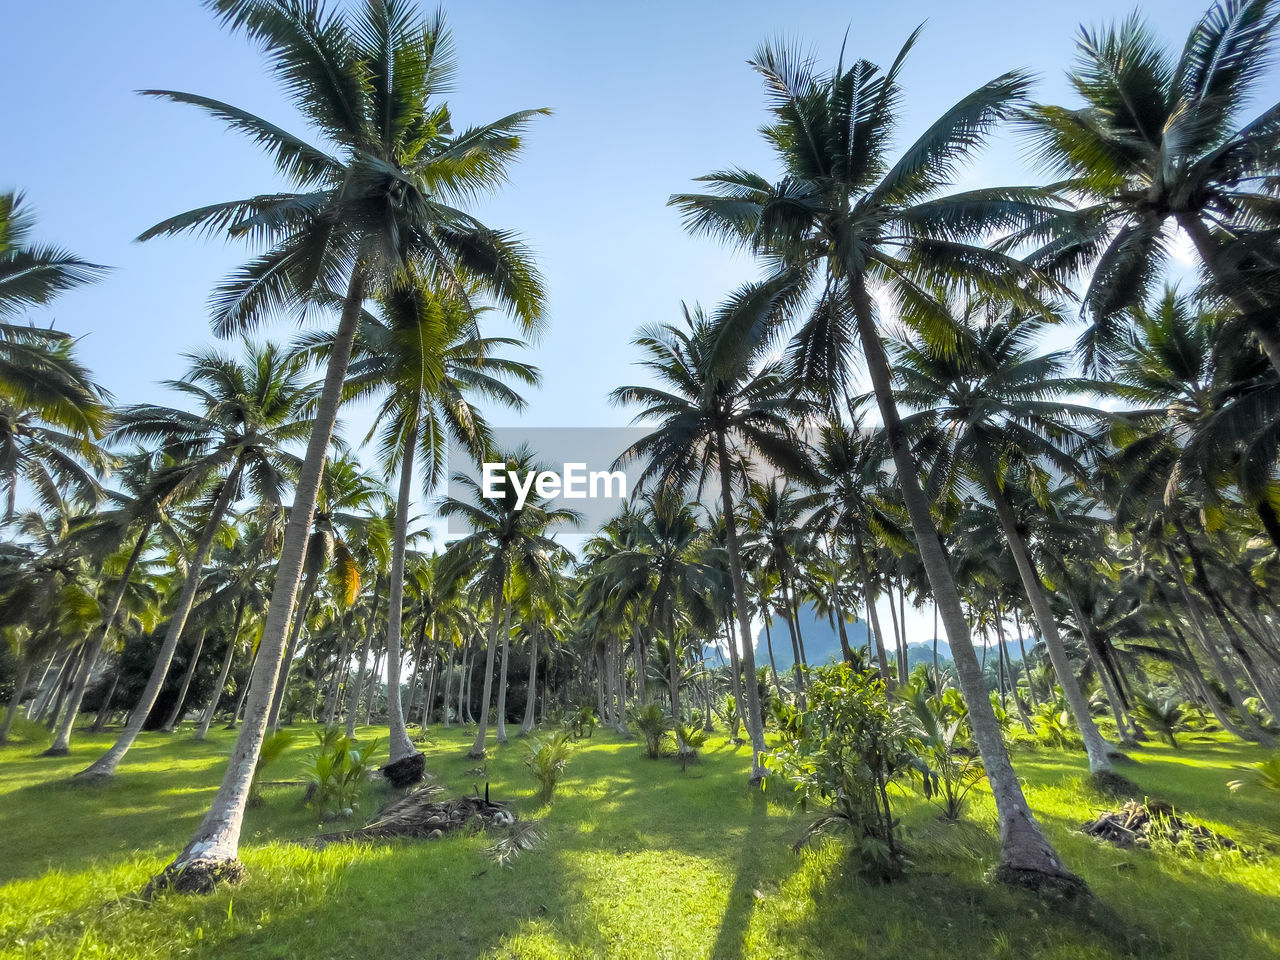 plant, tree, palm tree, tropical climate, nature, sky, land, tropics, beauty in nature, green, environment, growth, sunlight, coconut palm tree, grass, landscape, day, tranquility, scenics - nature, no people, outdoors, water, borassus flabellifer, plantation, travel destinations, field, travel, sunny, jungle, vegetation, tropical tree, tranquil scene, clear sky, flower, vacation, idyllic, blue